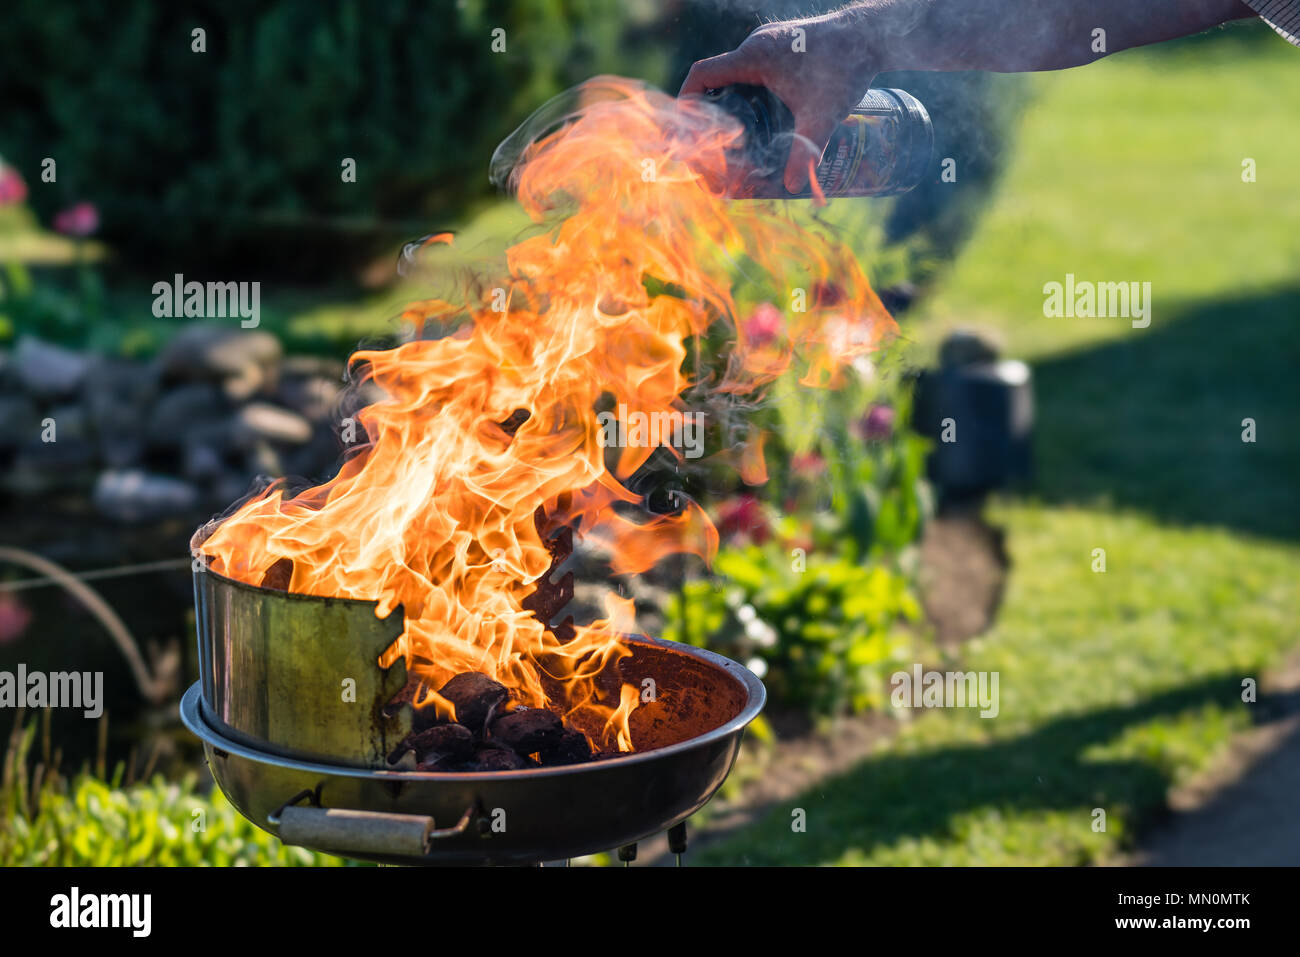 Liquid grill lighter on a charcoal grill Stock Photo